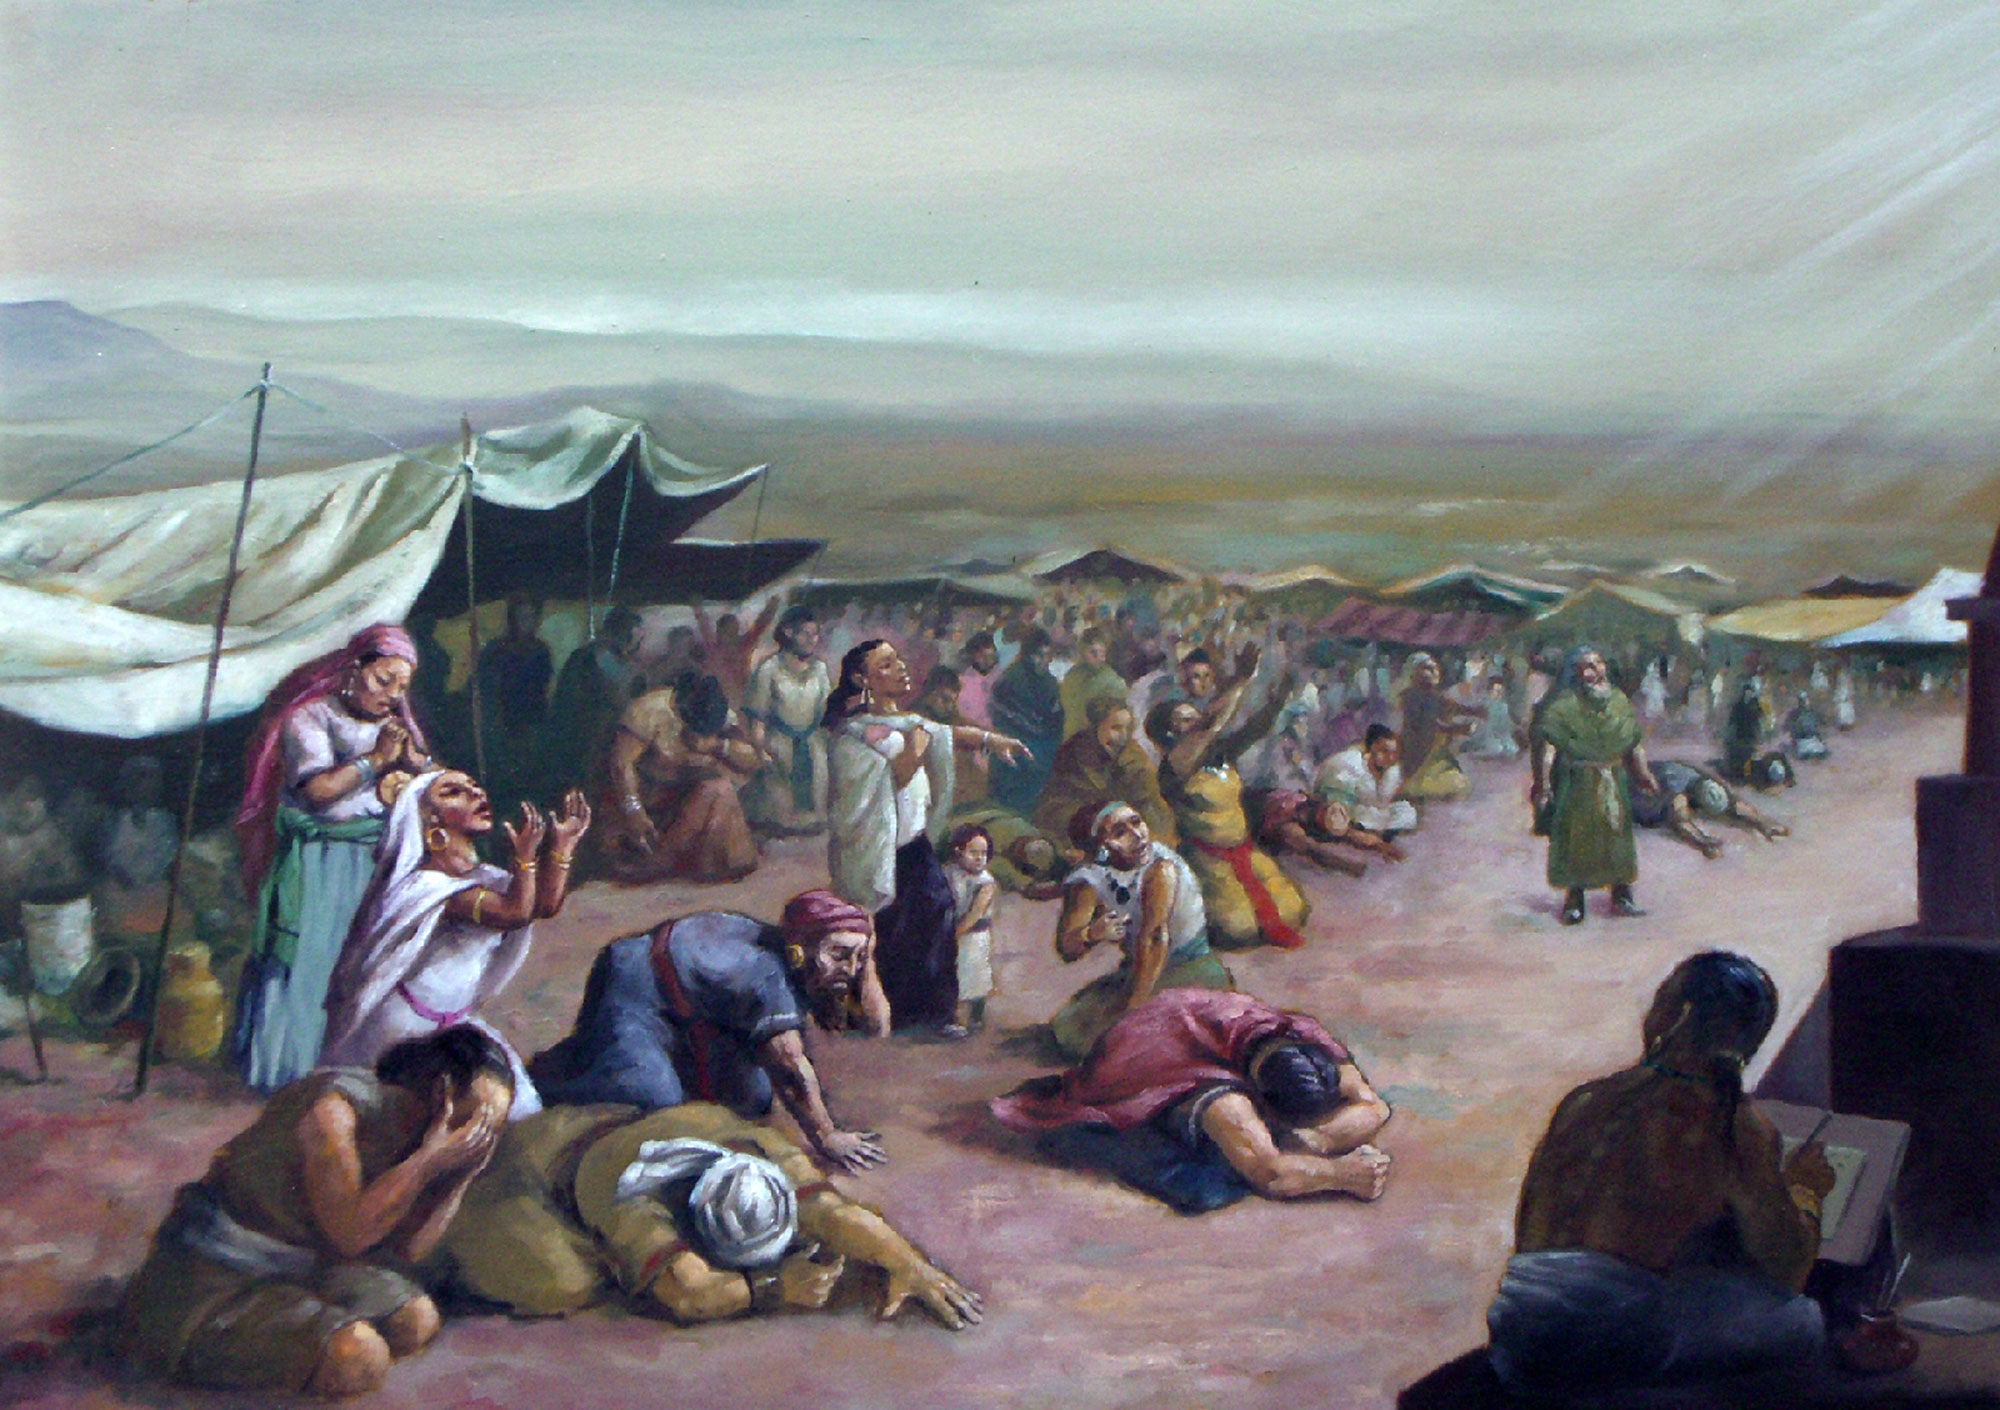 A group of people in front of tents stands in various attitudes of duplication, some fallen on the ground, some kneeling, some holding up their hands. In the bottom right corner is a scribe writing.